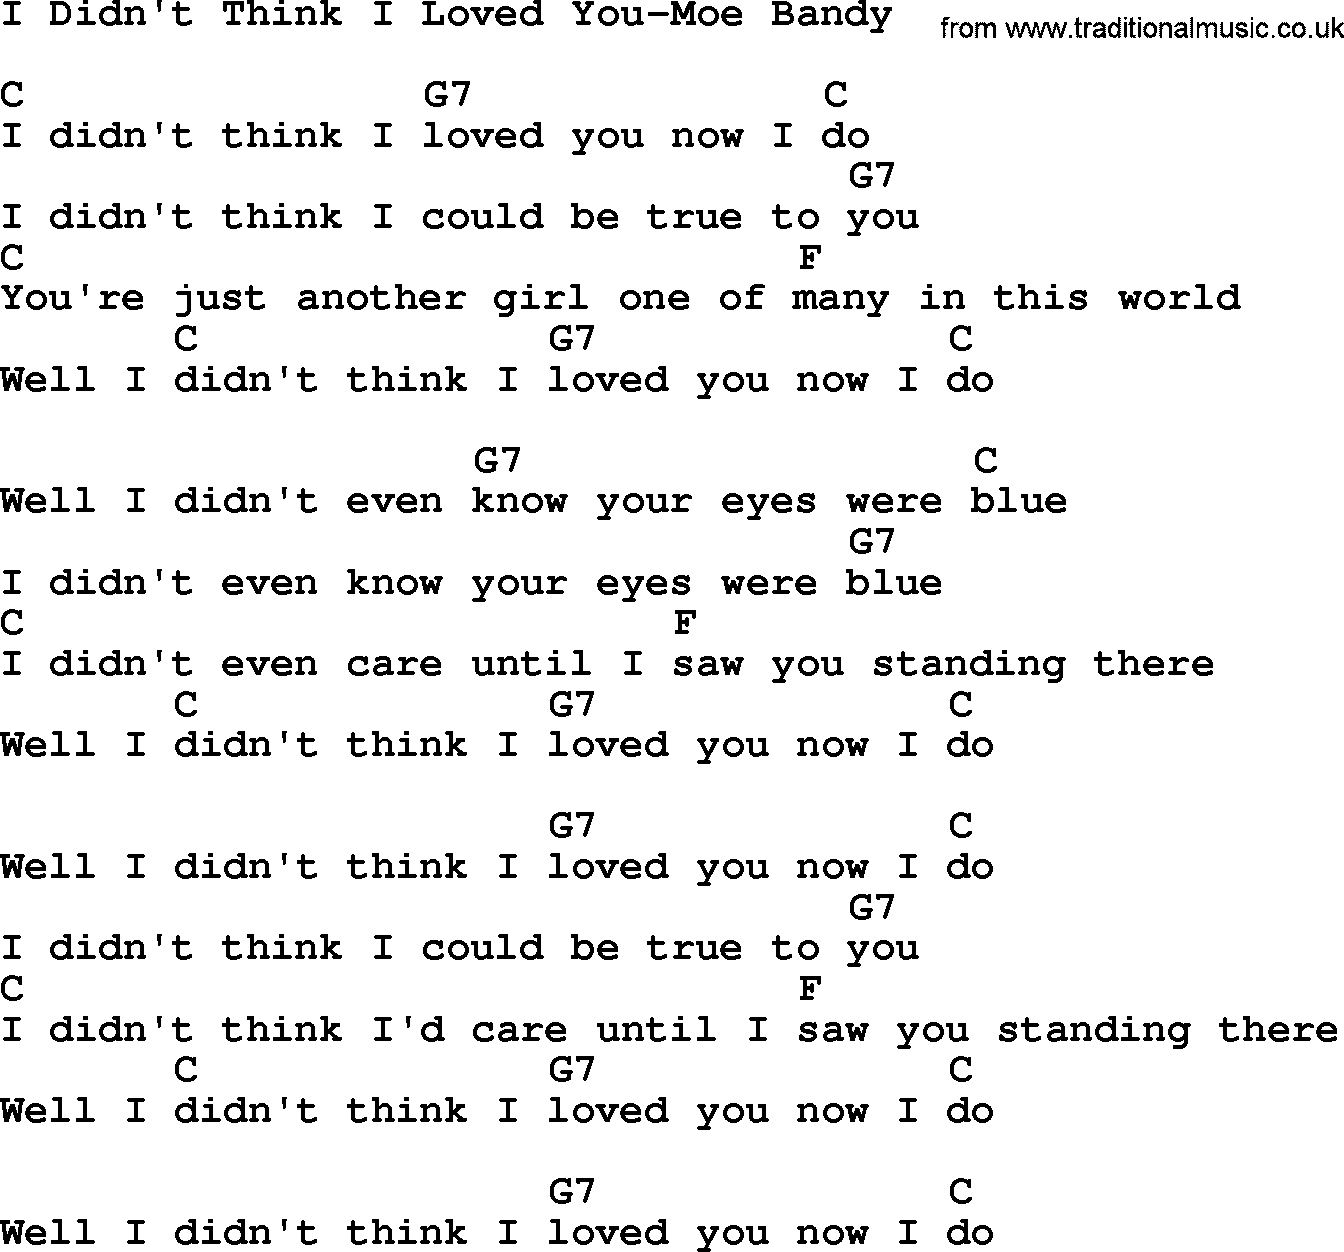 Country music song: I Didn't Think I Loved You-Moe Bandy lyrics and chords